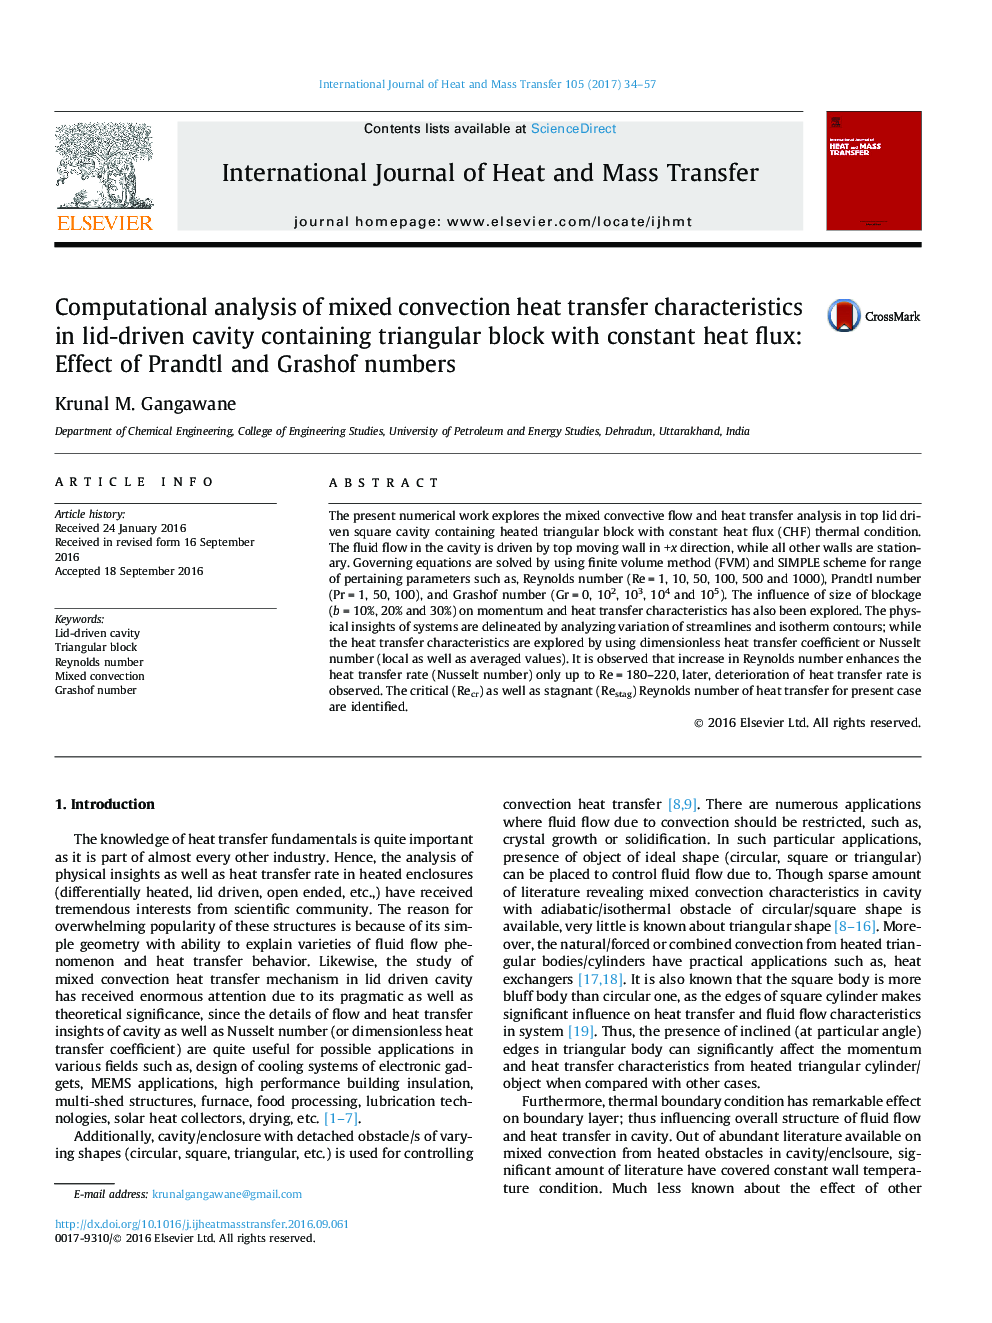 Computational analysis of mixed convection heat transfer characteristics in lid-driven cavity containing triangular block with constant heat flux: Effect of Prandtl and Grashof numbers